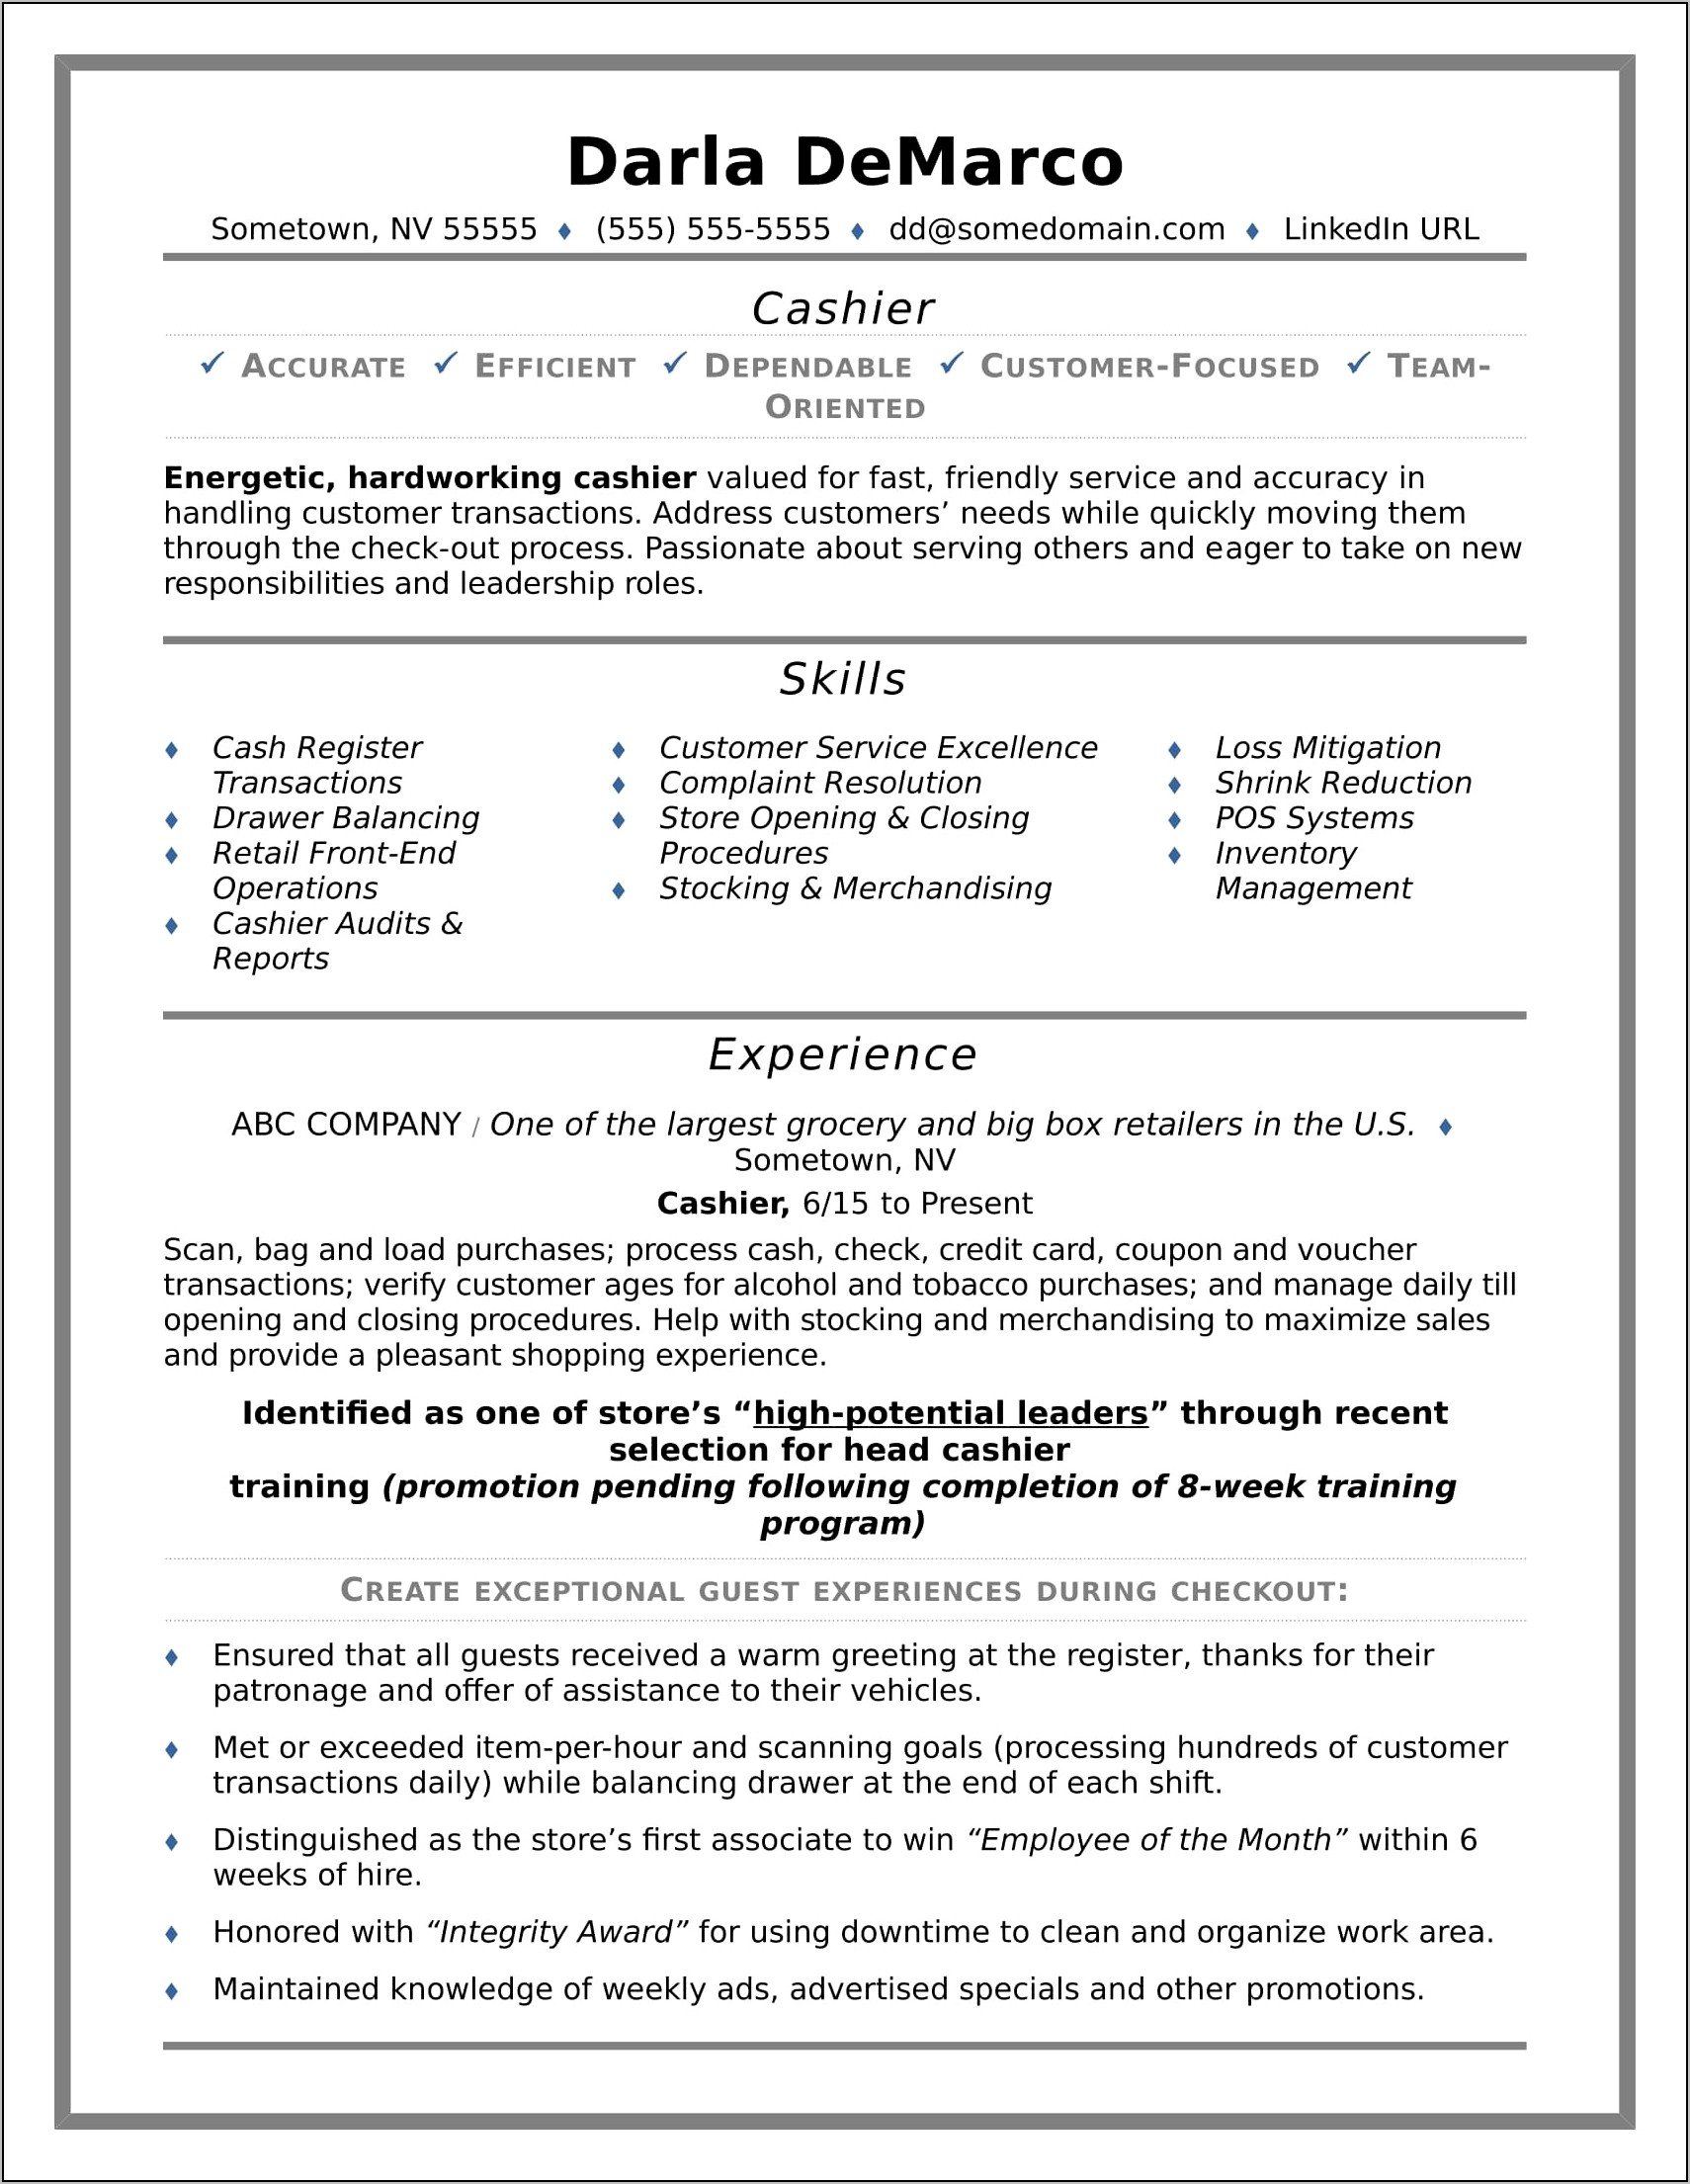 Monster Resume Writing Services Reviews